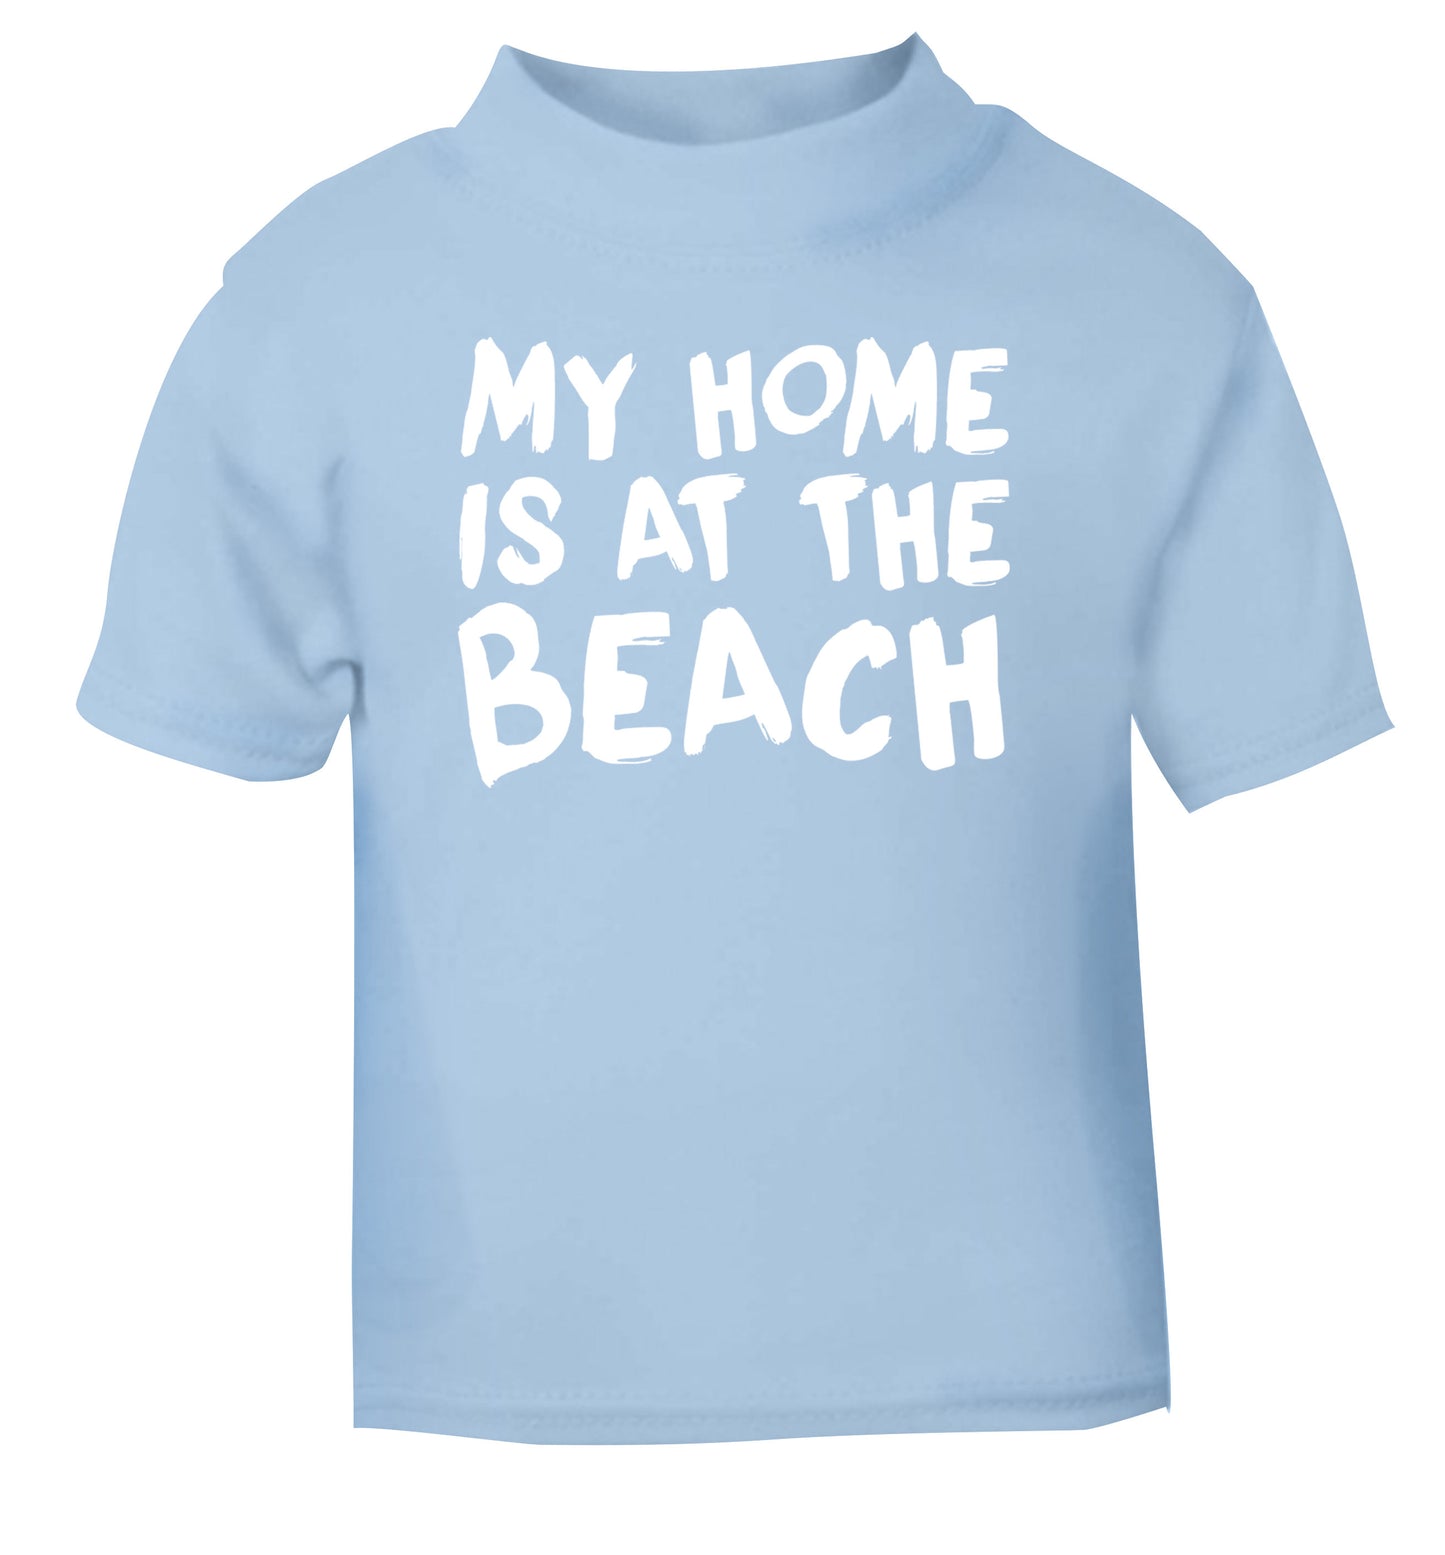 My home is at the beach light blue Baby Toddler Tshirt 2 Years